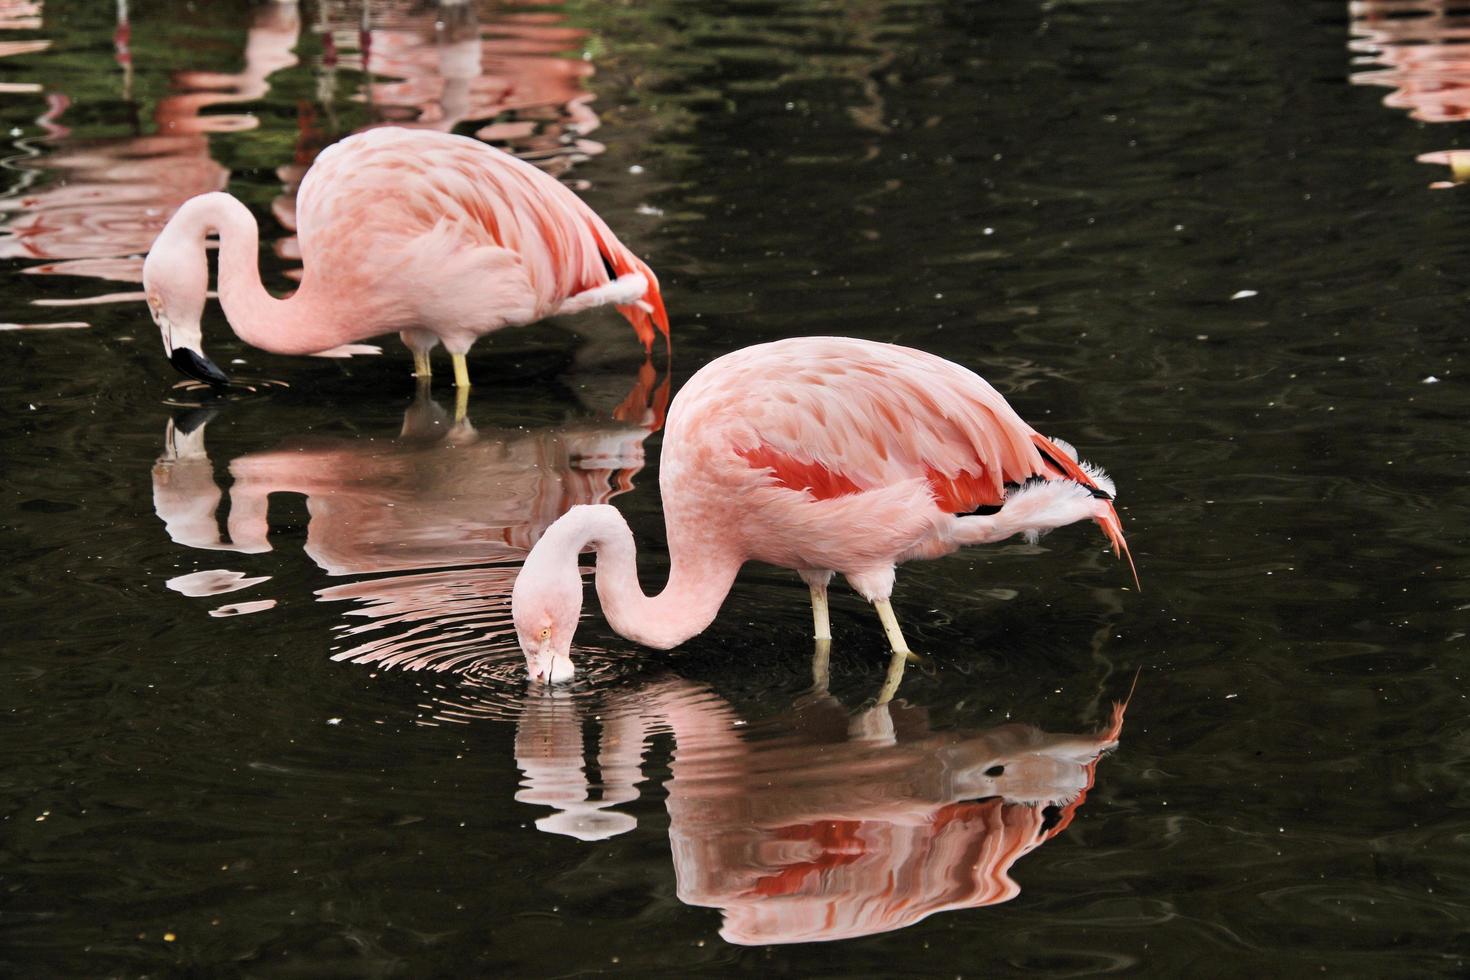 A view of a Flamingo in the water photo